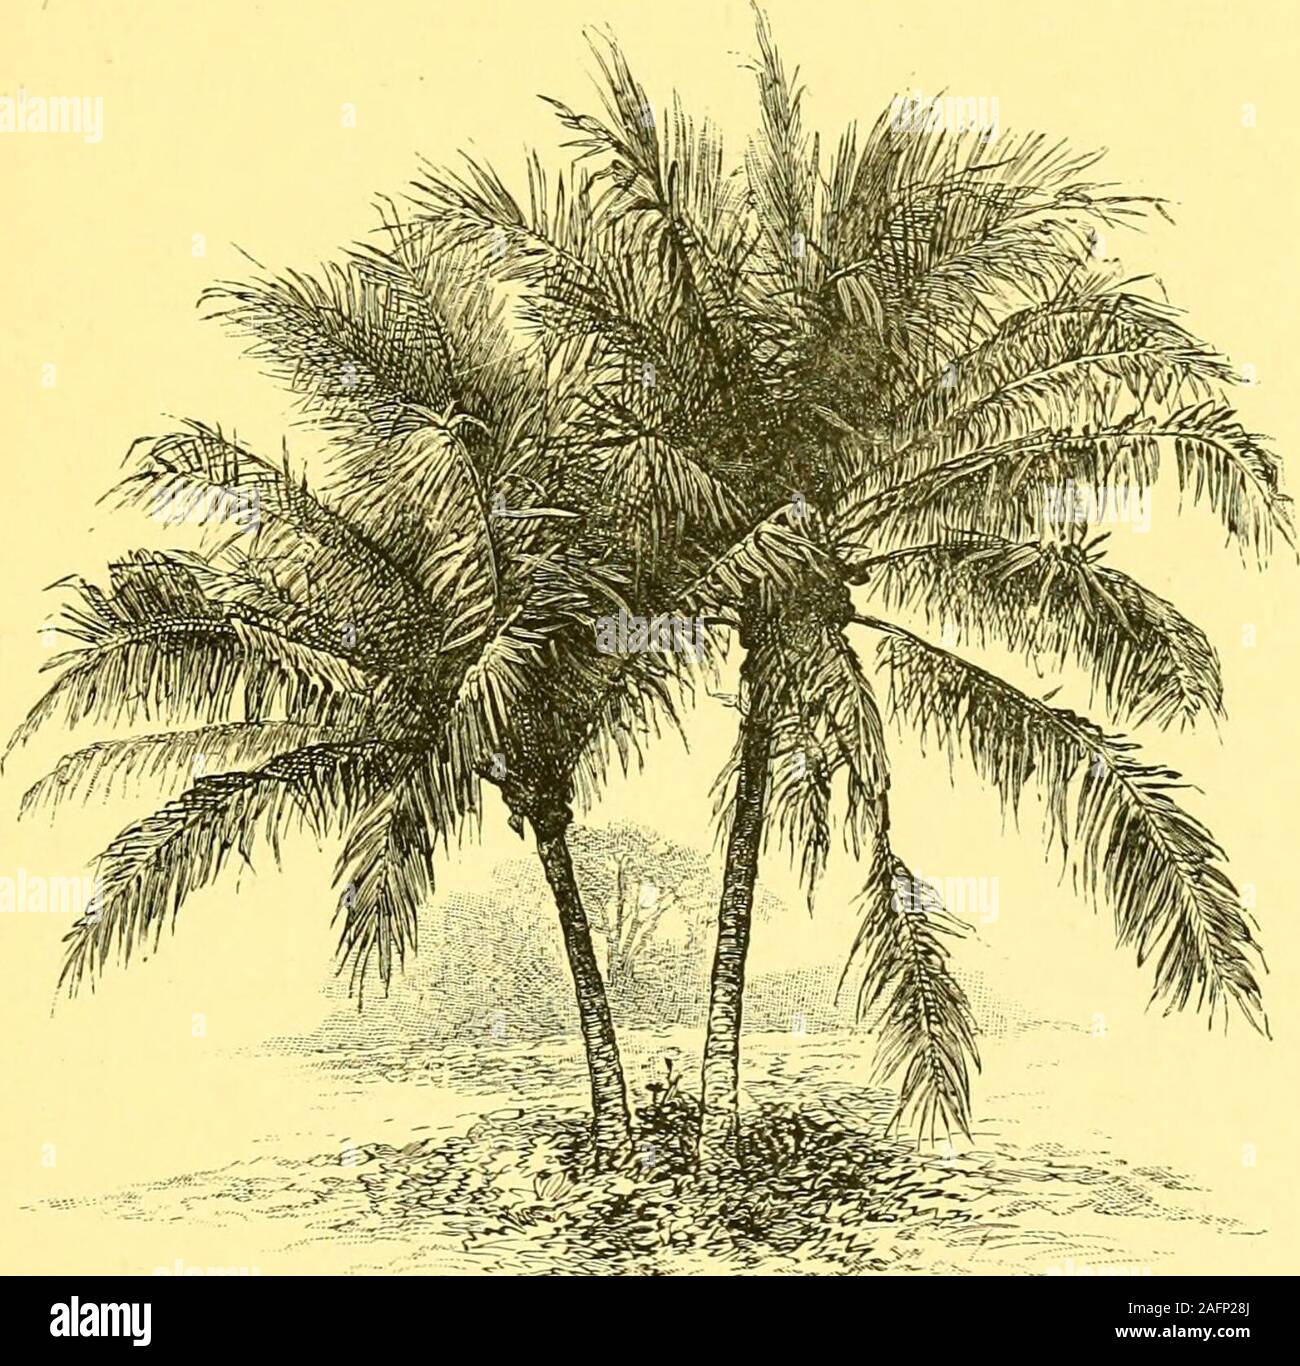 . The boy travellers in Australasia : adventures of two youths in a journey to the Sandwich, Marquesas, Society, Samoan and Feejee islands, and through the colonies of New Zealand, New South Wales, Queensland, Victoria, Tasmania, and South Australia. d he theninvented a pump by which air could be forced. His boat took fifteen weeks for its construction. Its sails were ofnative matting, the cordage was of the bark of the hibiscus, the oakumfor calking the seams was made from banana stumps and cocoanut MURDER OF THE MISSIONARY REV. JOHN WILLIAMS. Ill husks, and the sheaves were of iron-wood. To Stock Photo